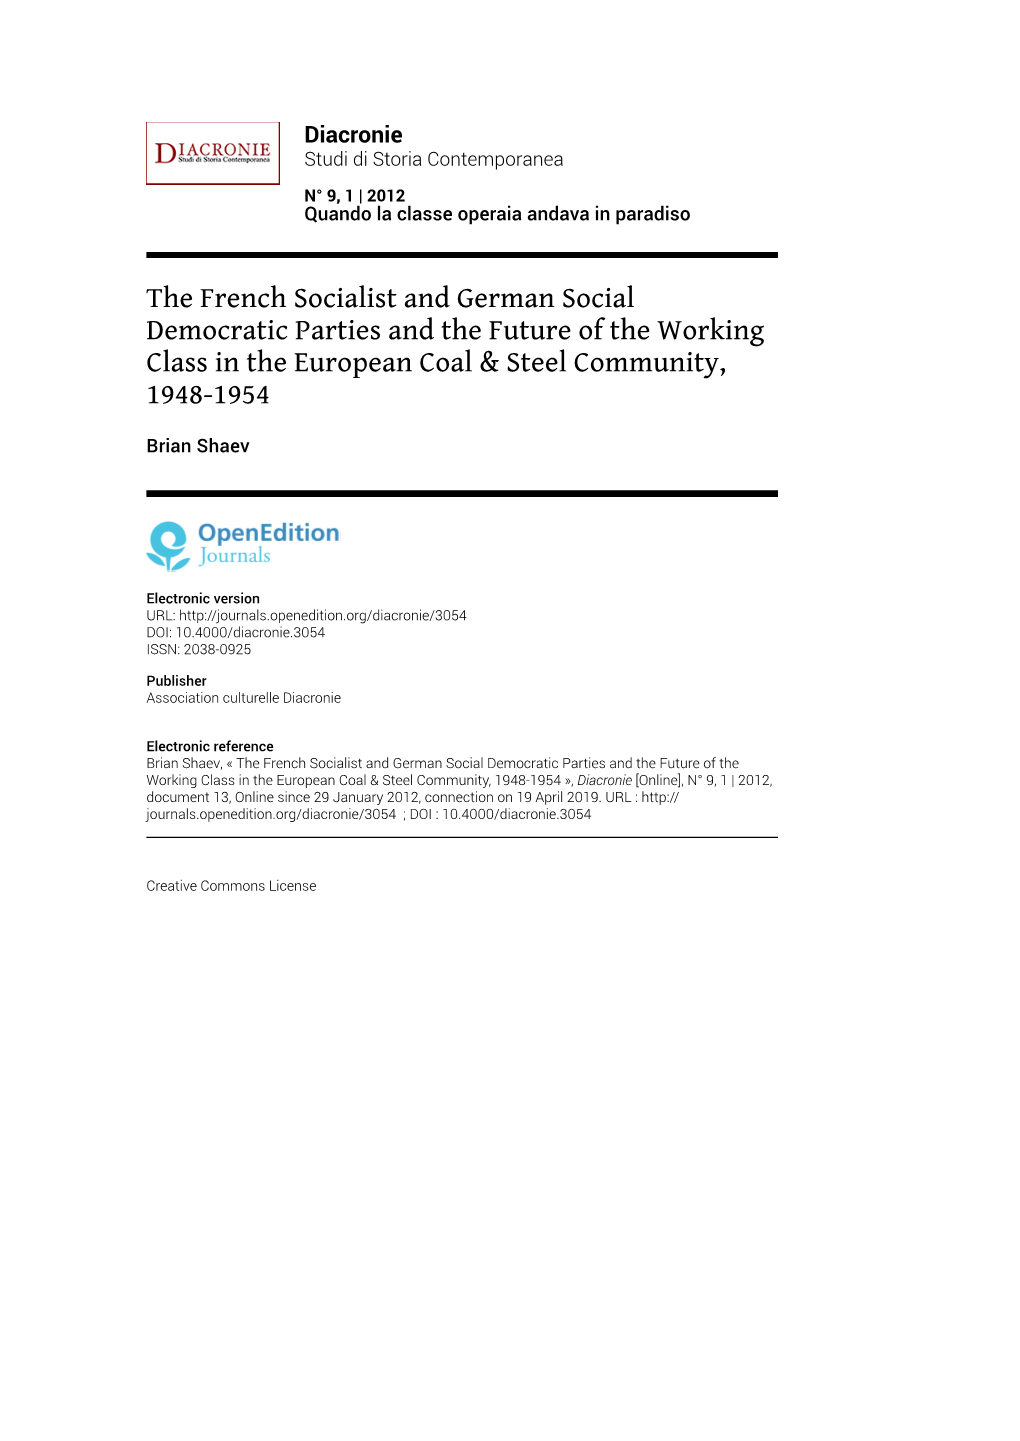 The French Socialist and German Social Democratic Parties and the Future of the Working Class in the European Coal & Steel Community, 1948-1954